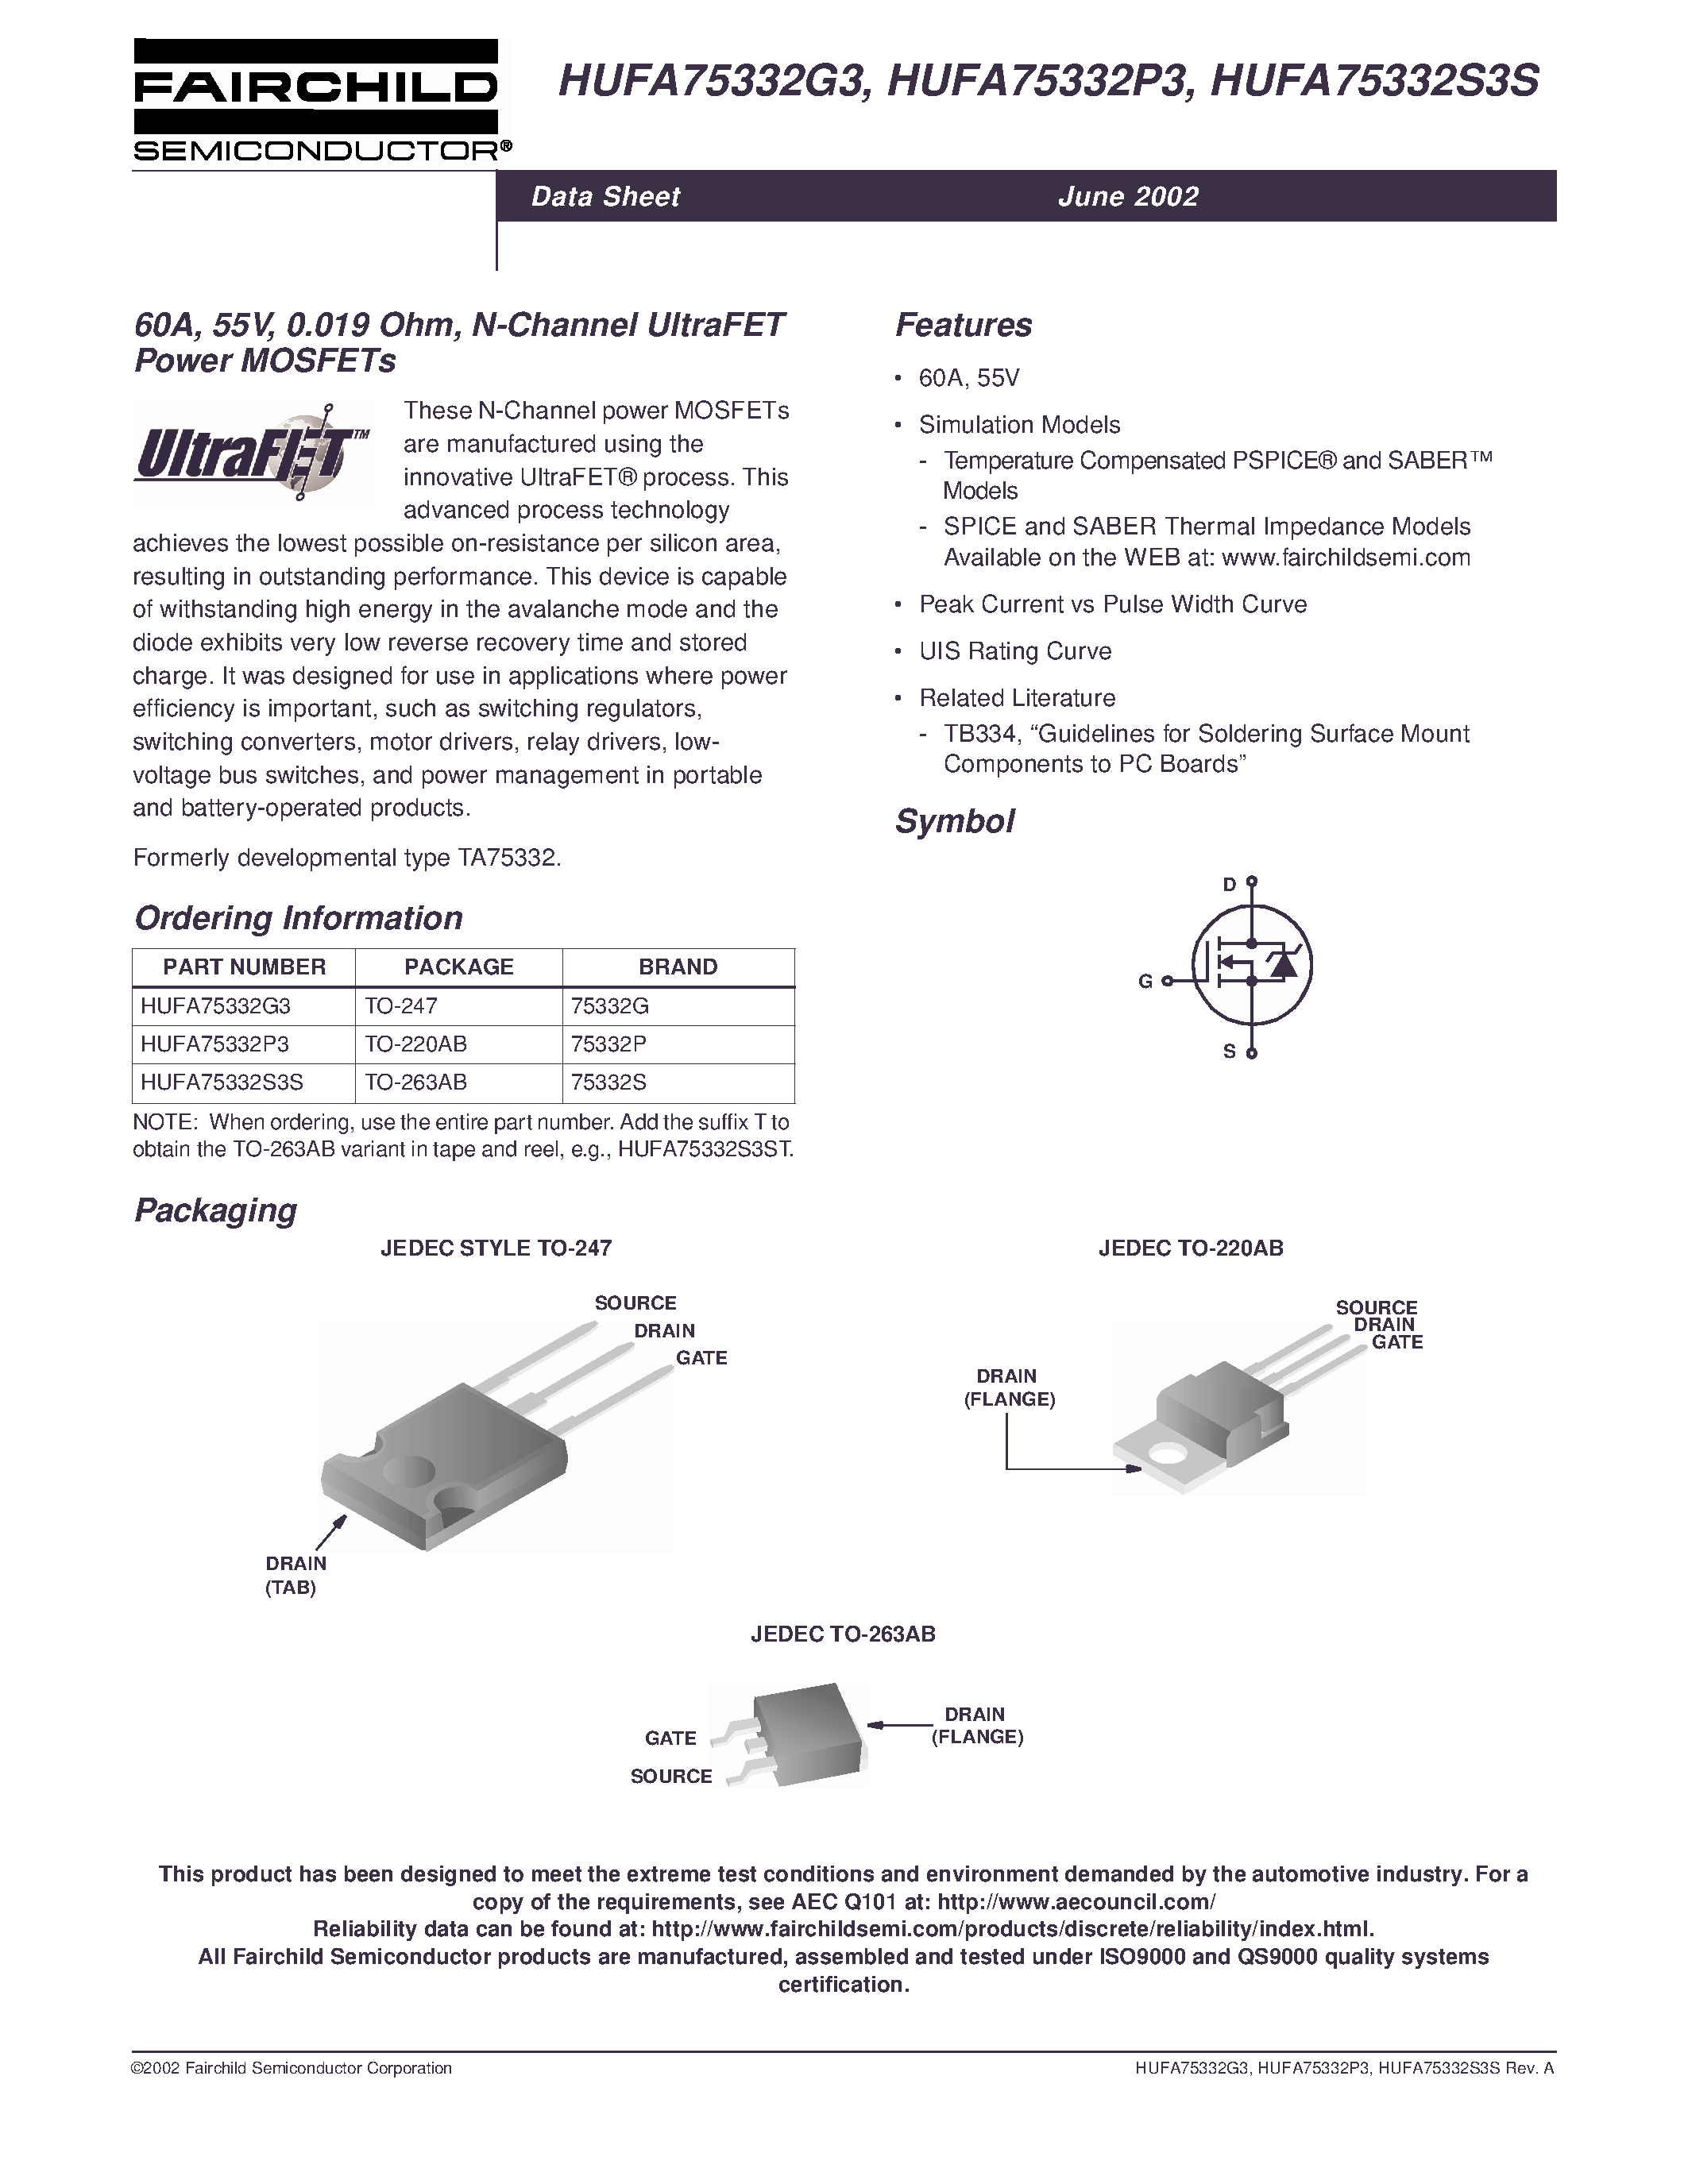 Даташит HUFA75333S3S - 66A/ 55V/ 0.016 Ohm. N-Channel UltraFET Power MOSFETs страница 1